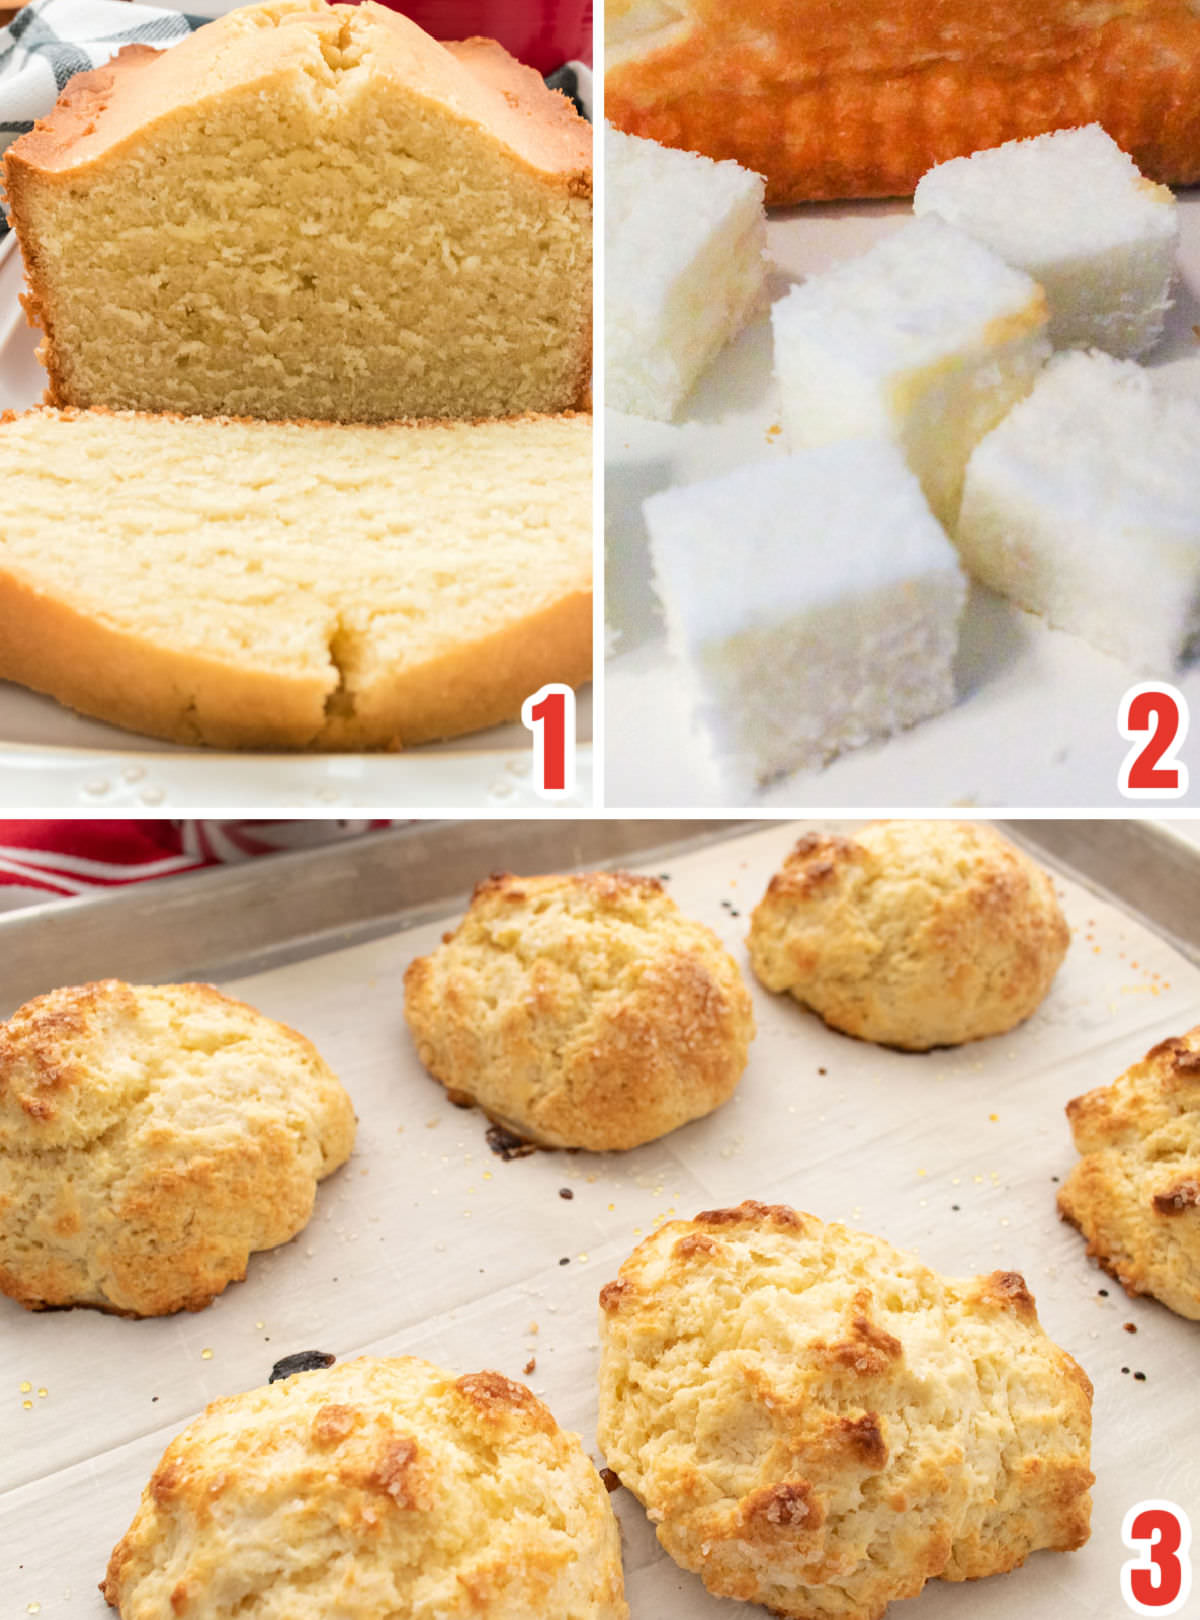 Collage image showing three different options for the cake layer including pound cake, angel food cake and homemade sweet biscuits.